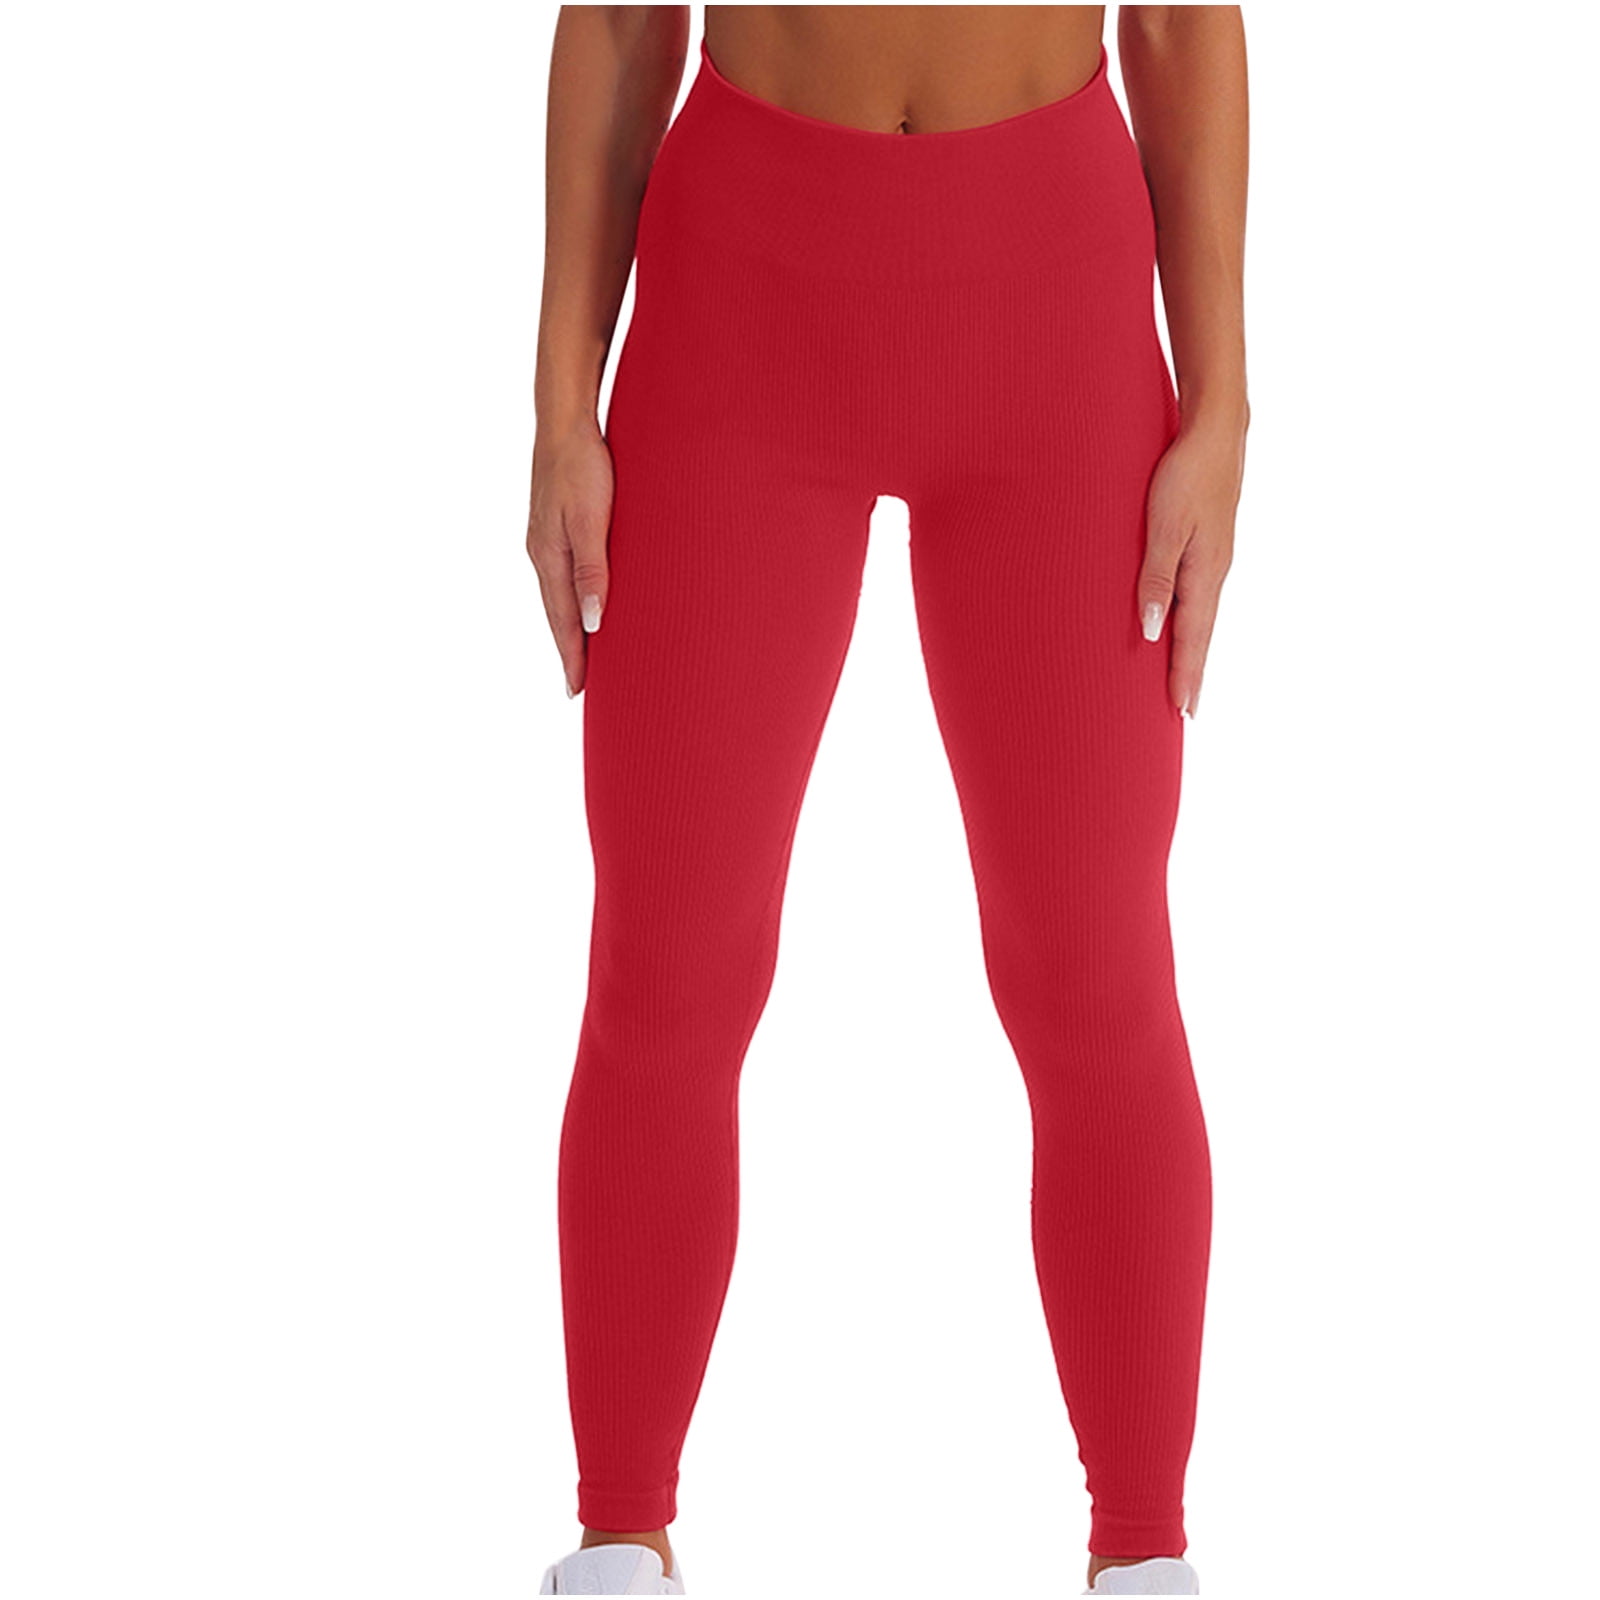 Yogalicious activewear leggings red with spandex size small